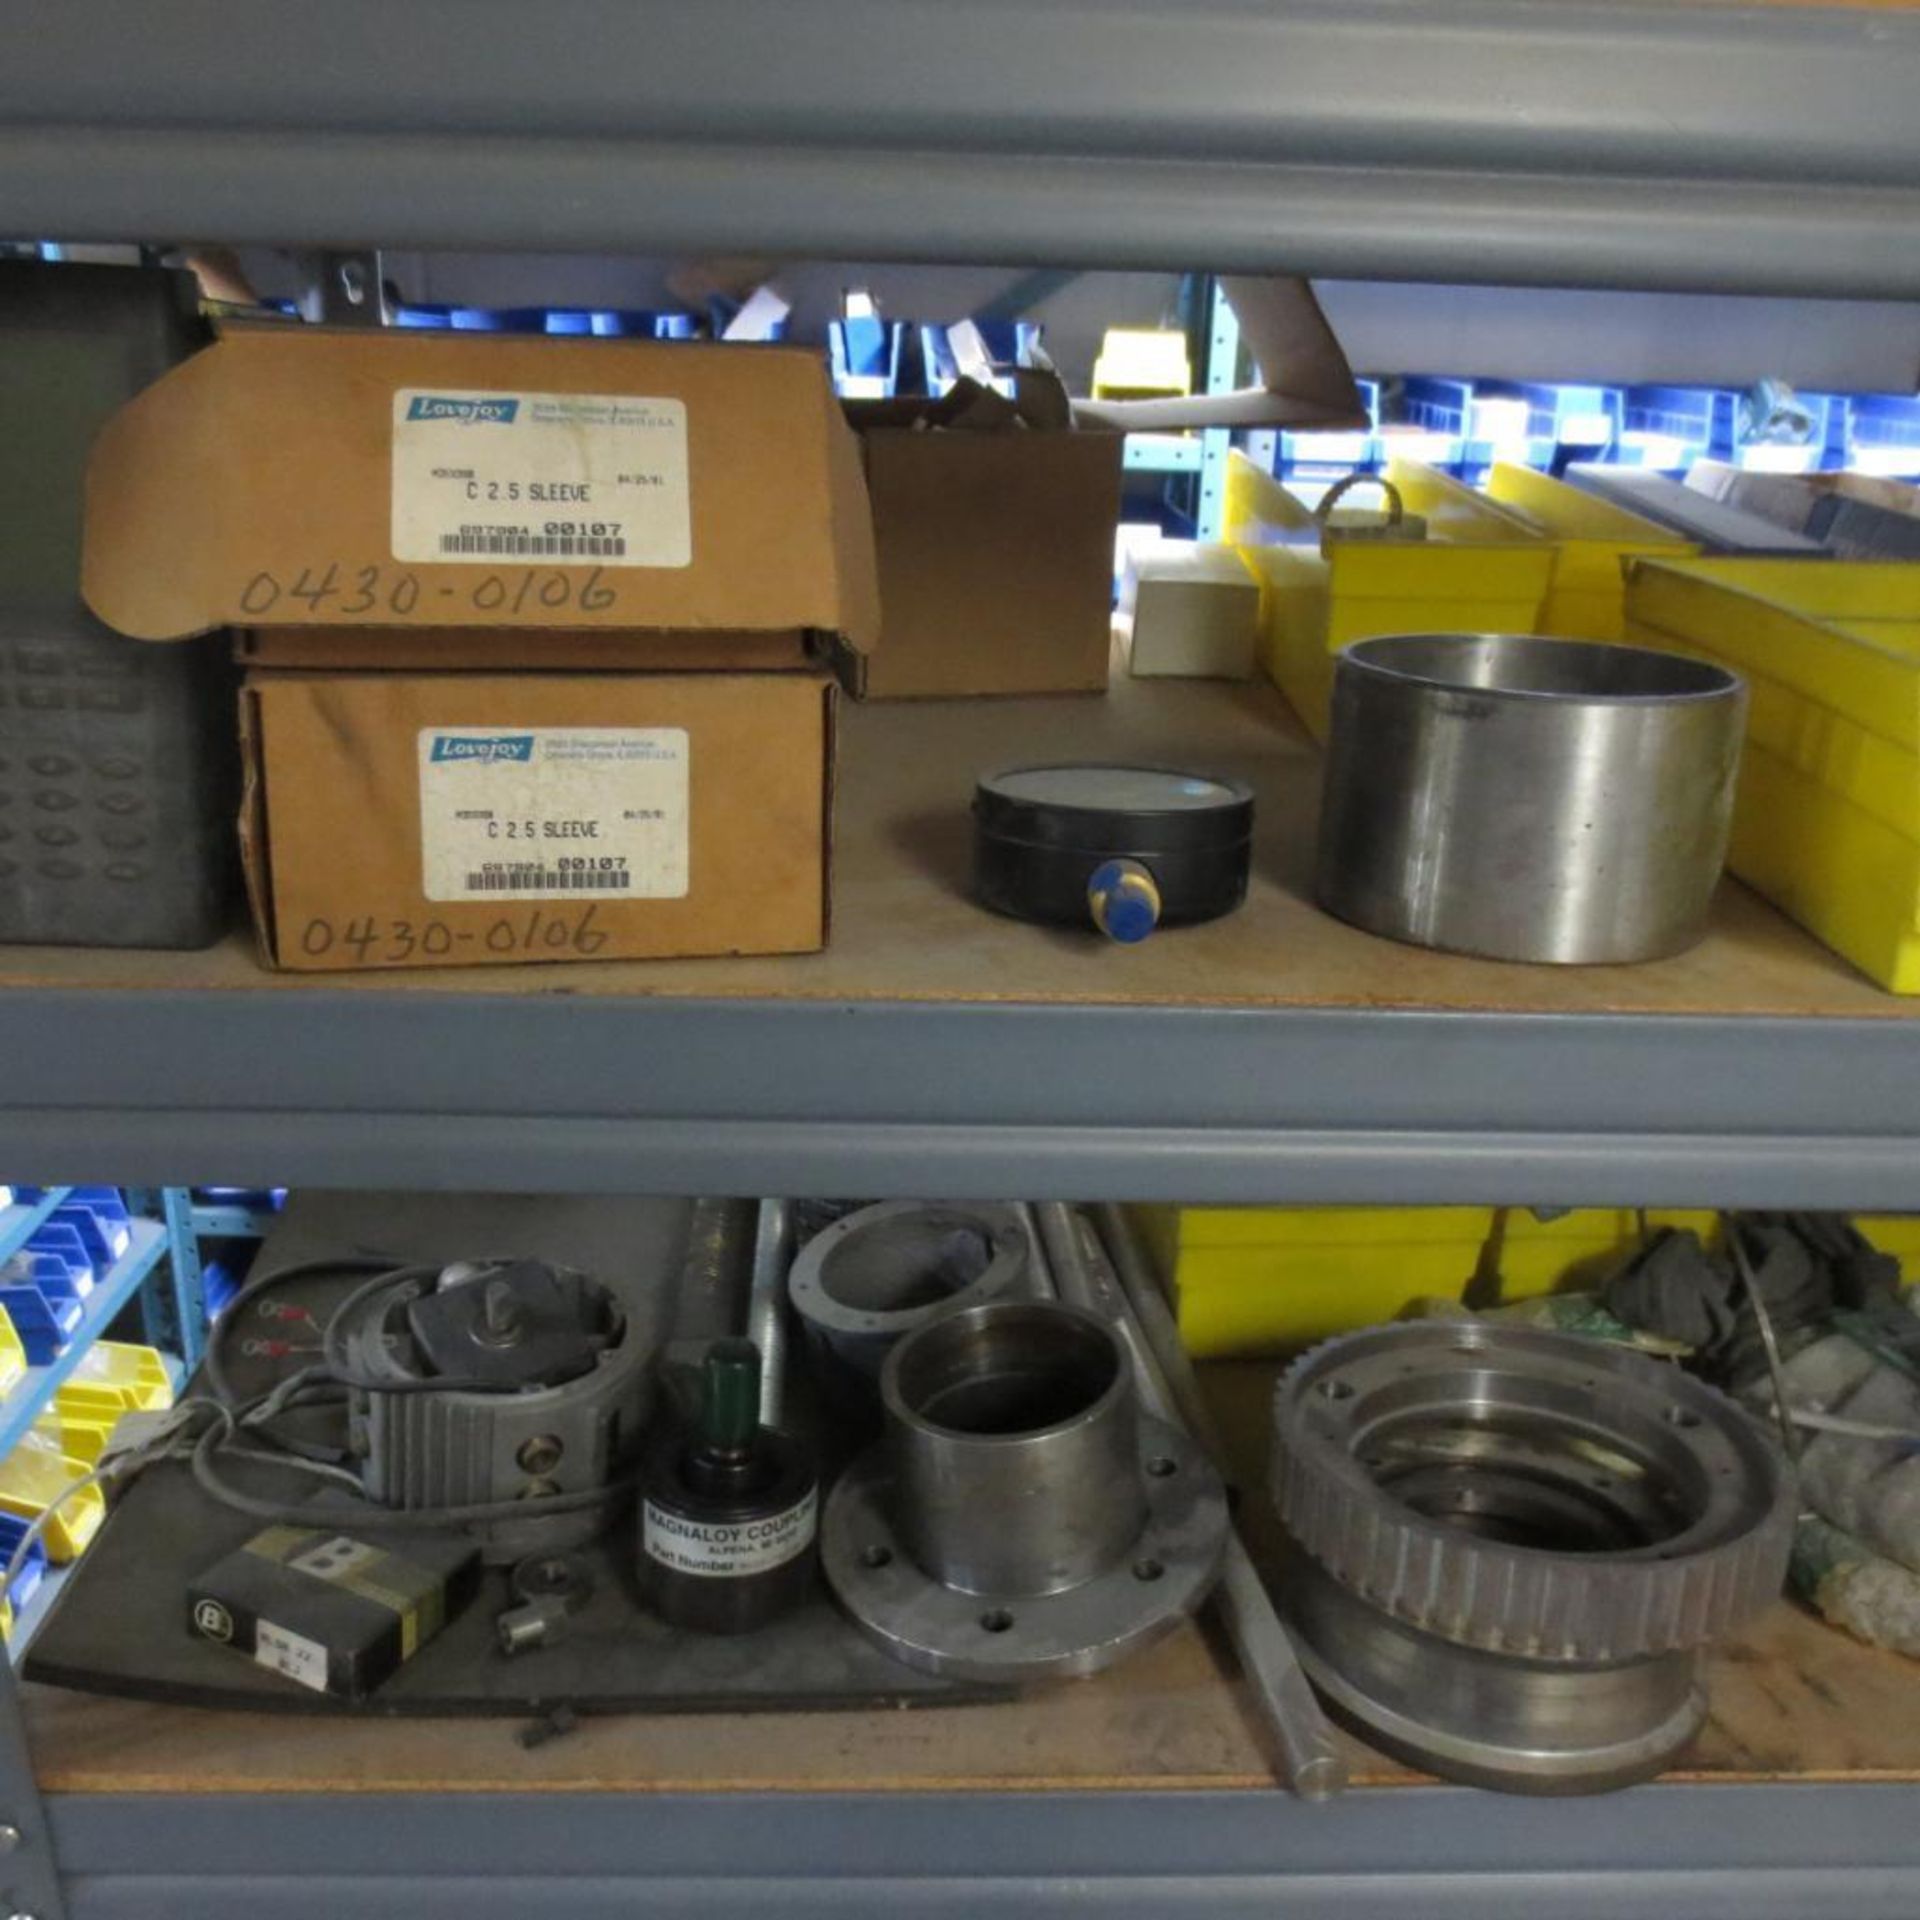 Parts Room Consisting of Gears, Electric Boards, Motors, AB Item, Filters, Motor Starters and Parts - Image 19 of 42